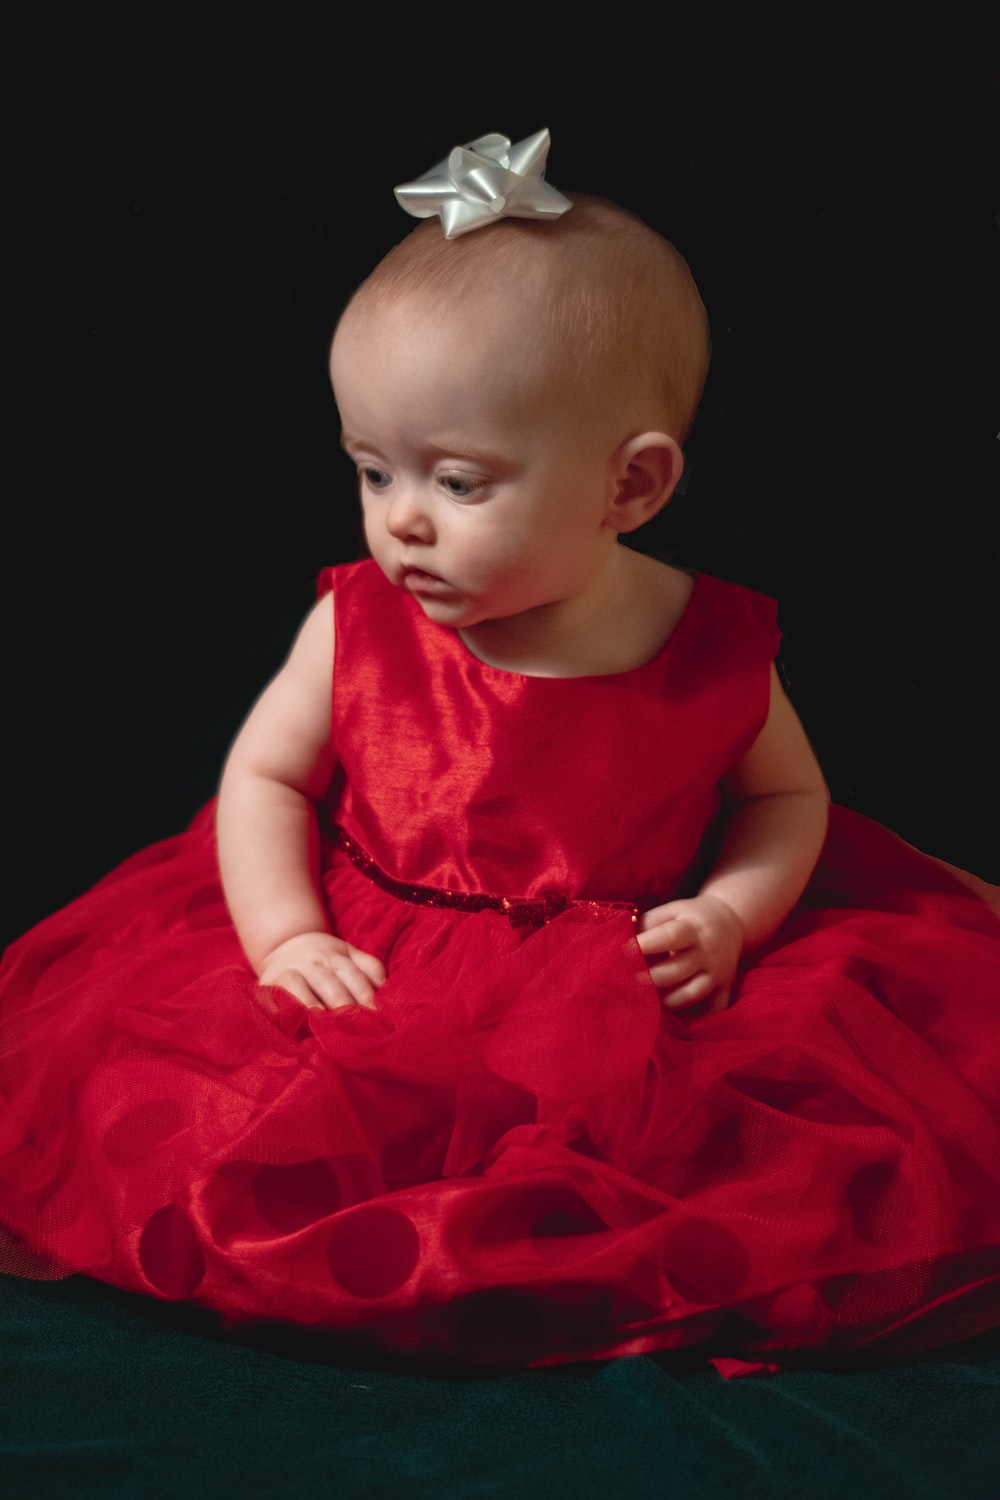 Baby Dress Picture. Download Free Image